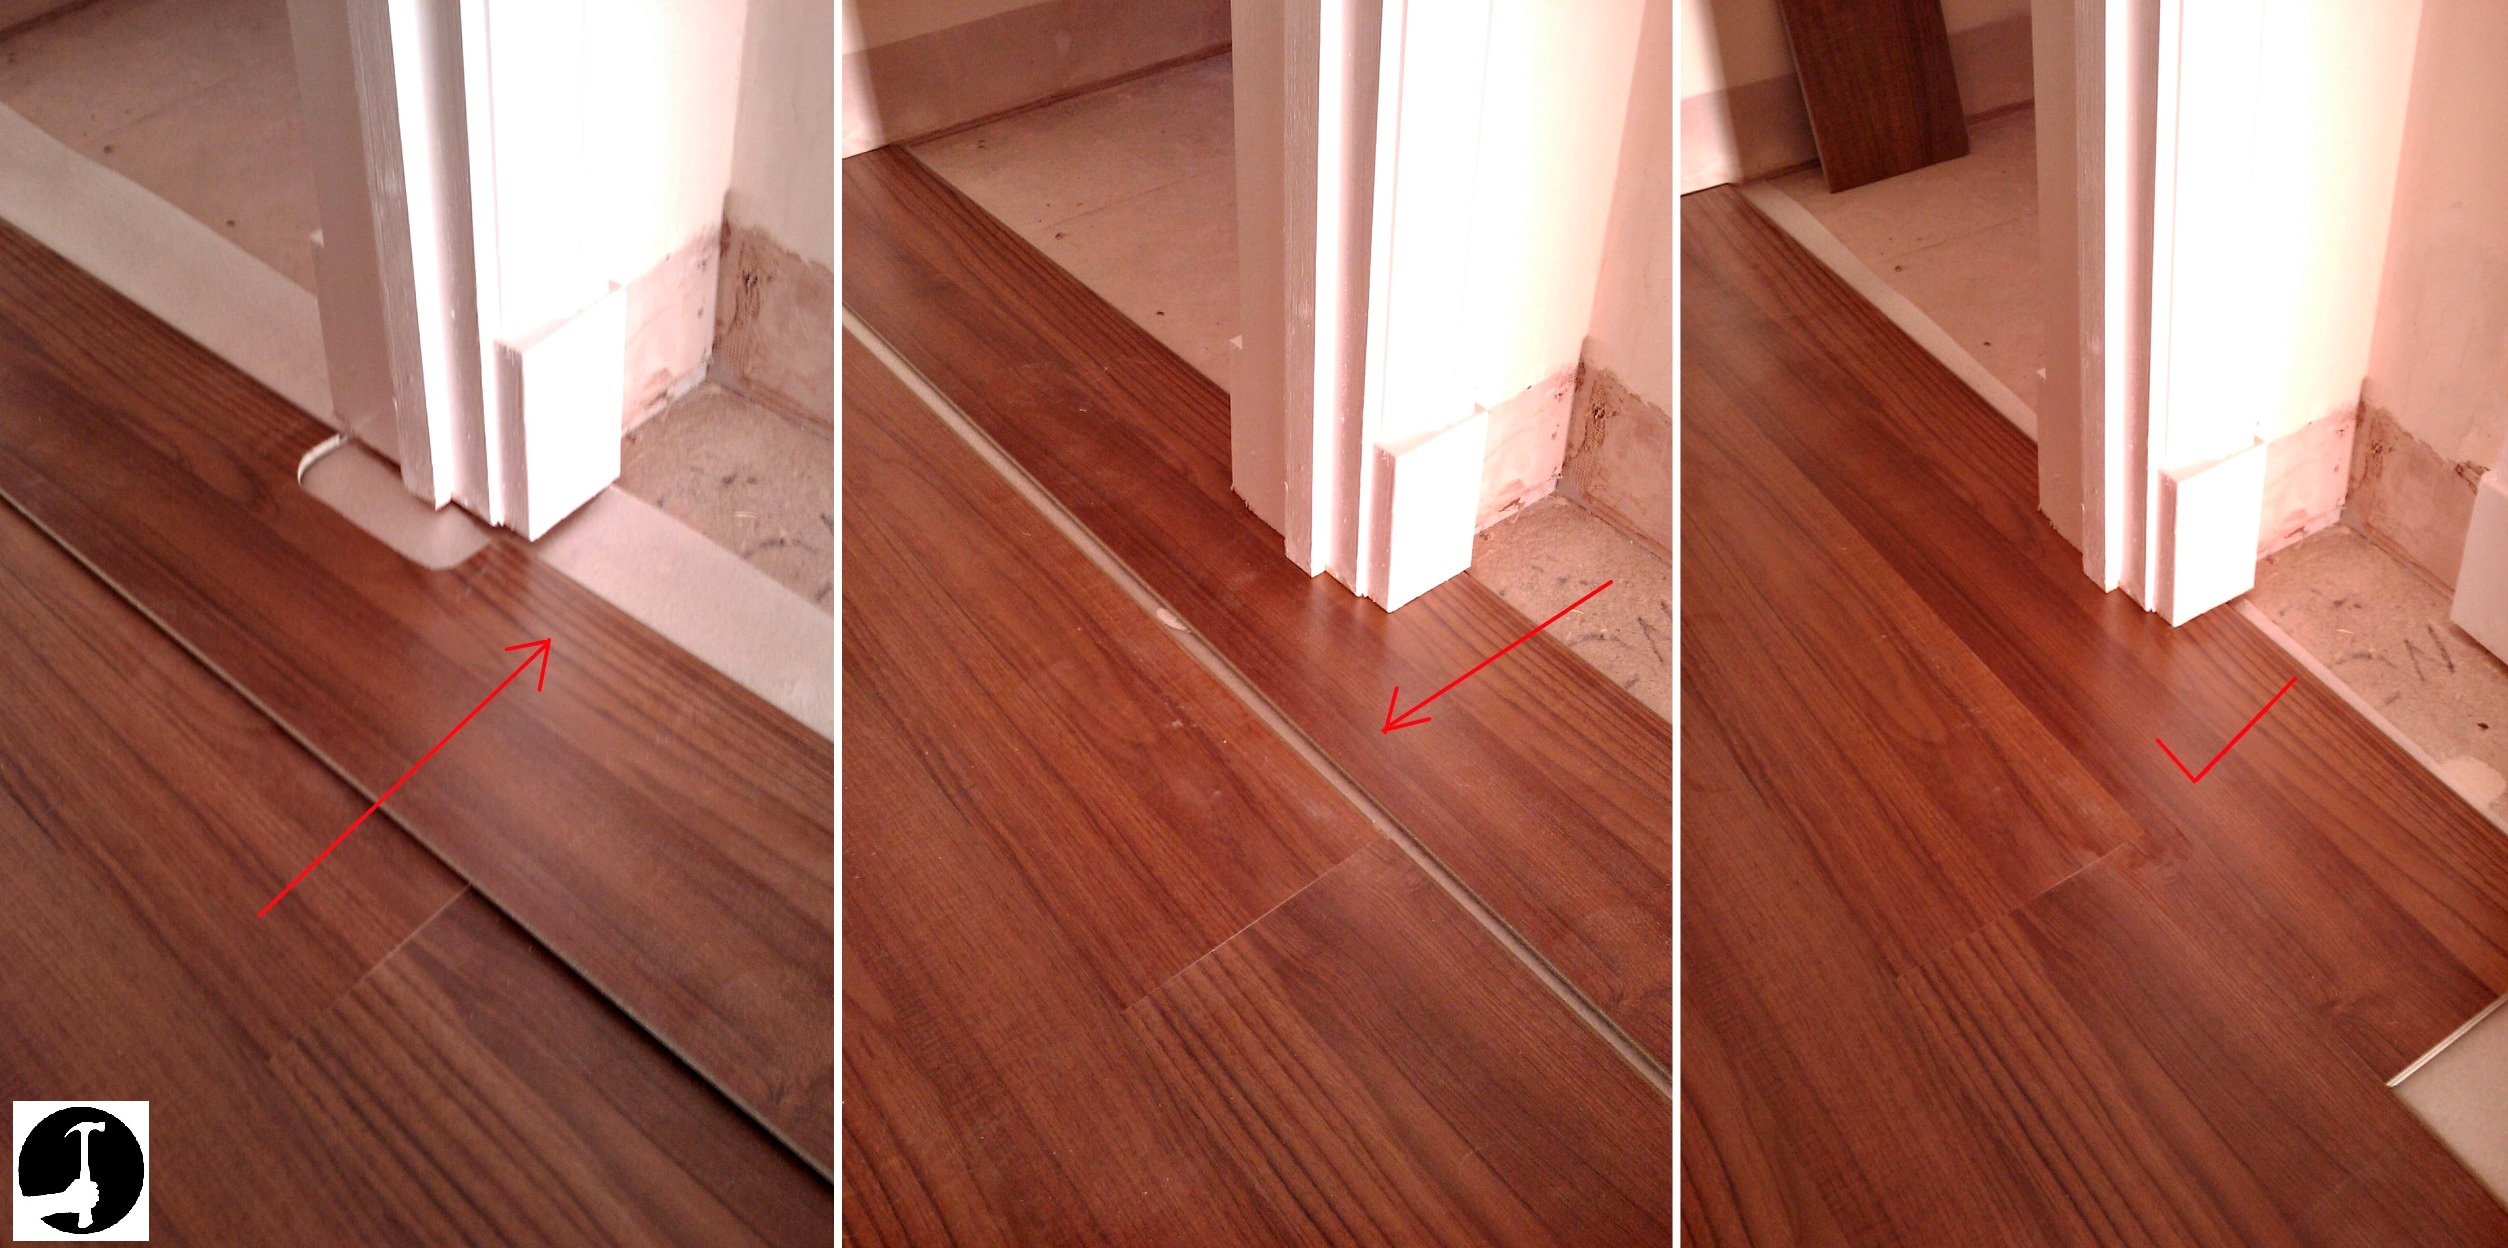 How To Lay Laminate In A Doorway For, How To Plan Out Laying Laminate Flooring